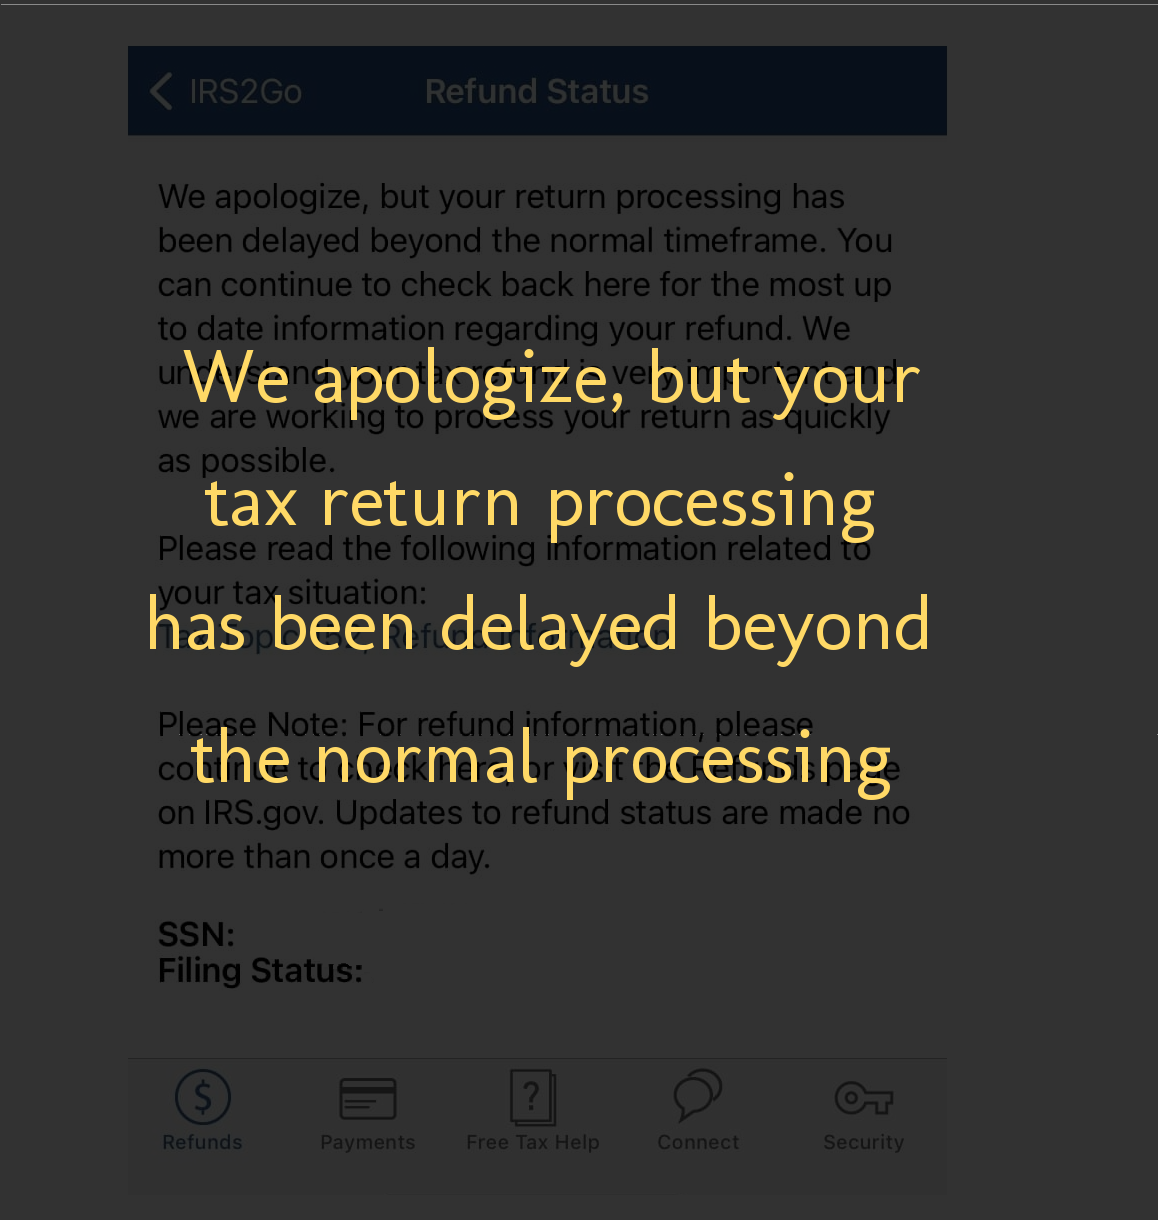 tax-return-processing-has-been-delayed-beyond-the-normal-timeframe